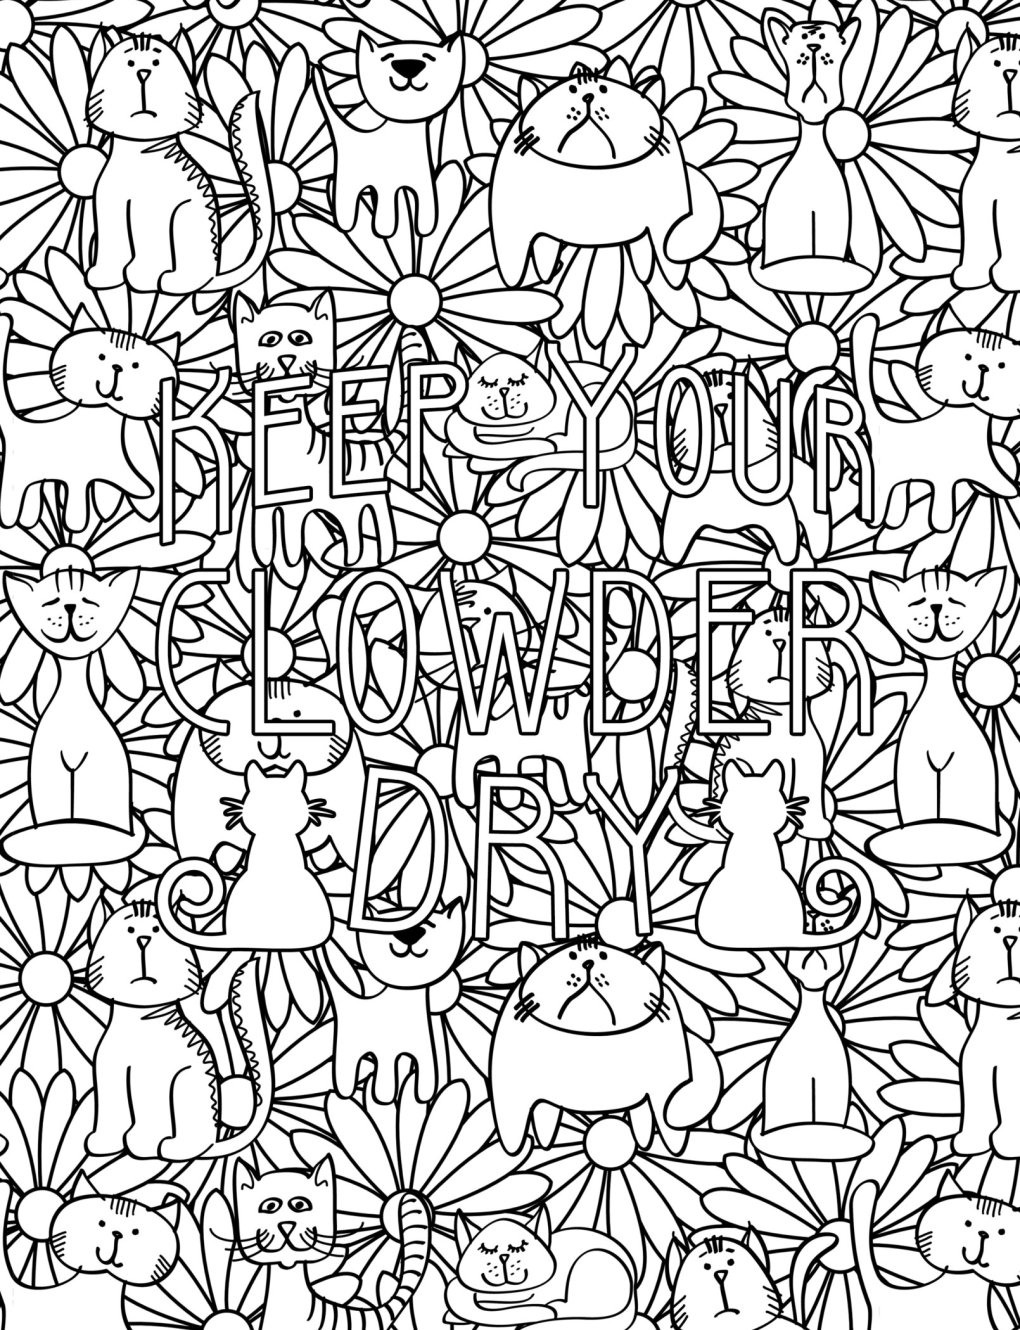 Cat Puzzle: Colour in the Clowder of Cats for Fun! – Print and Share